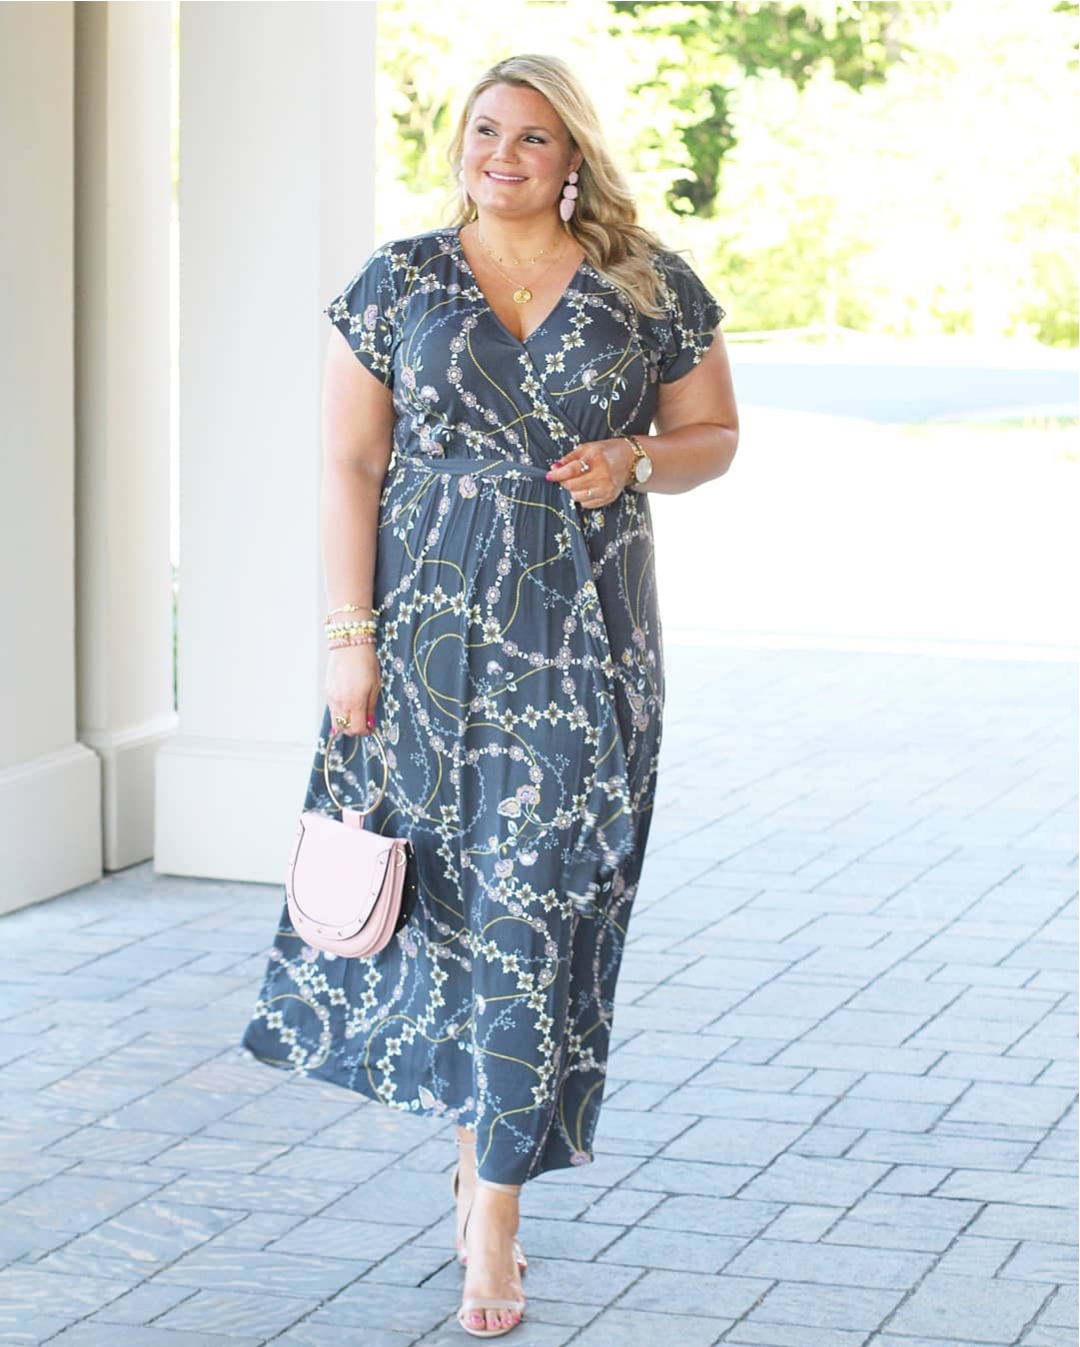 Loft maxi dress at the blogging conference fabulously Overdressed